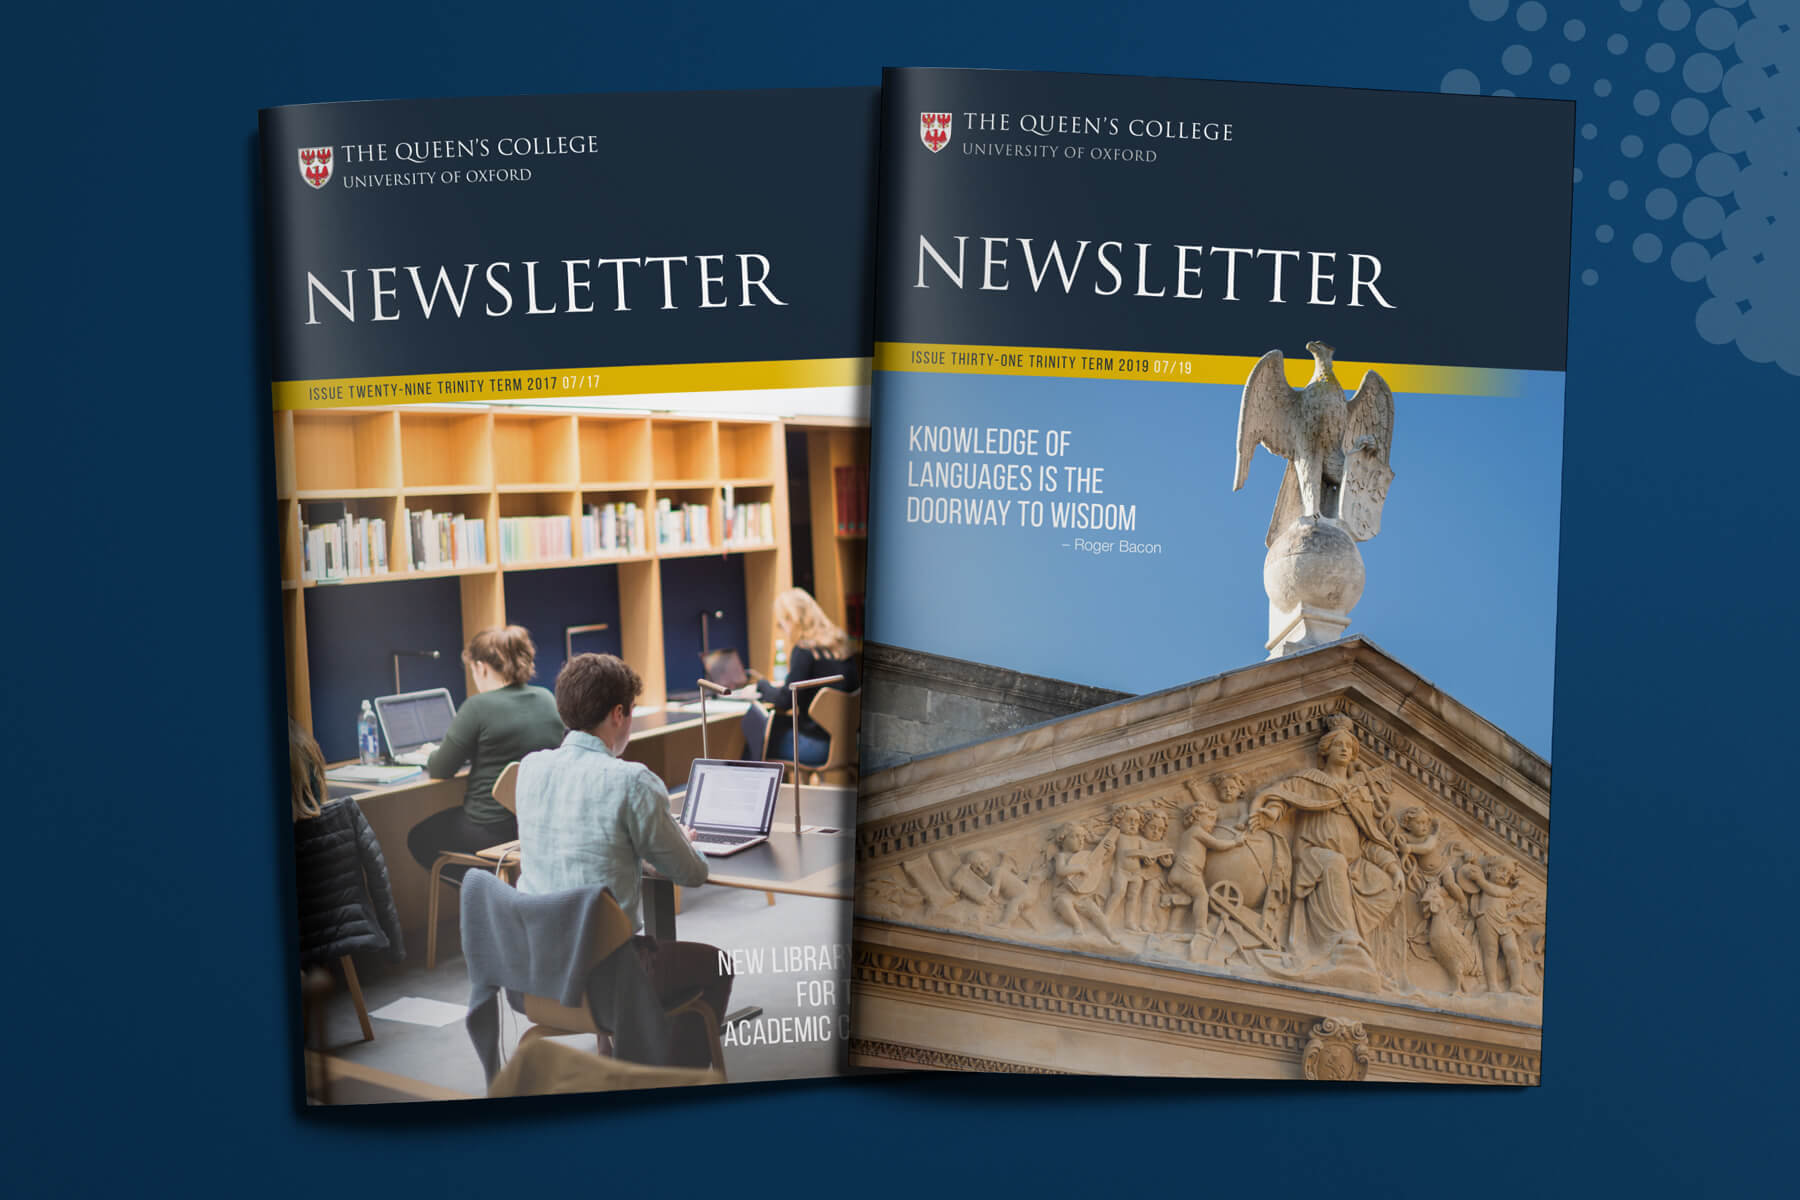 <div class="overlay" style="background-image: url('/Portals/_default/Skins/HolyWellPress/Thumbnail-Corner-Dots.svg')">
<div class="overlaytext">
<h2>newsletter design and printing</h2>

<h3>The Queen&#39;s College, Oxford</h3>
</div>
</div>
